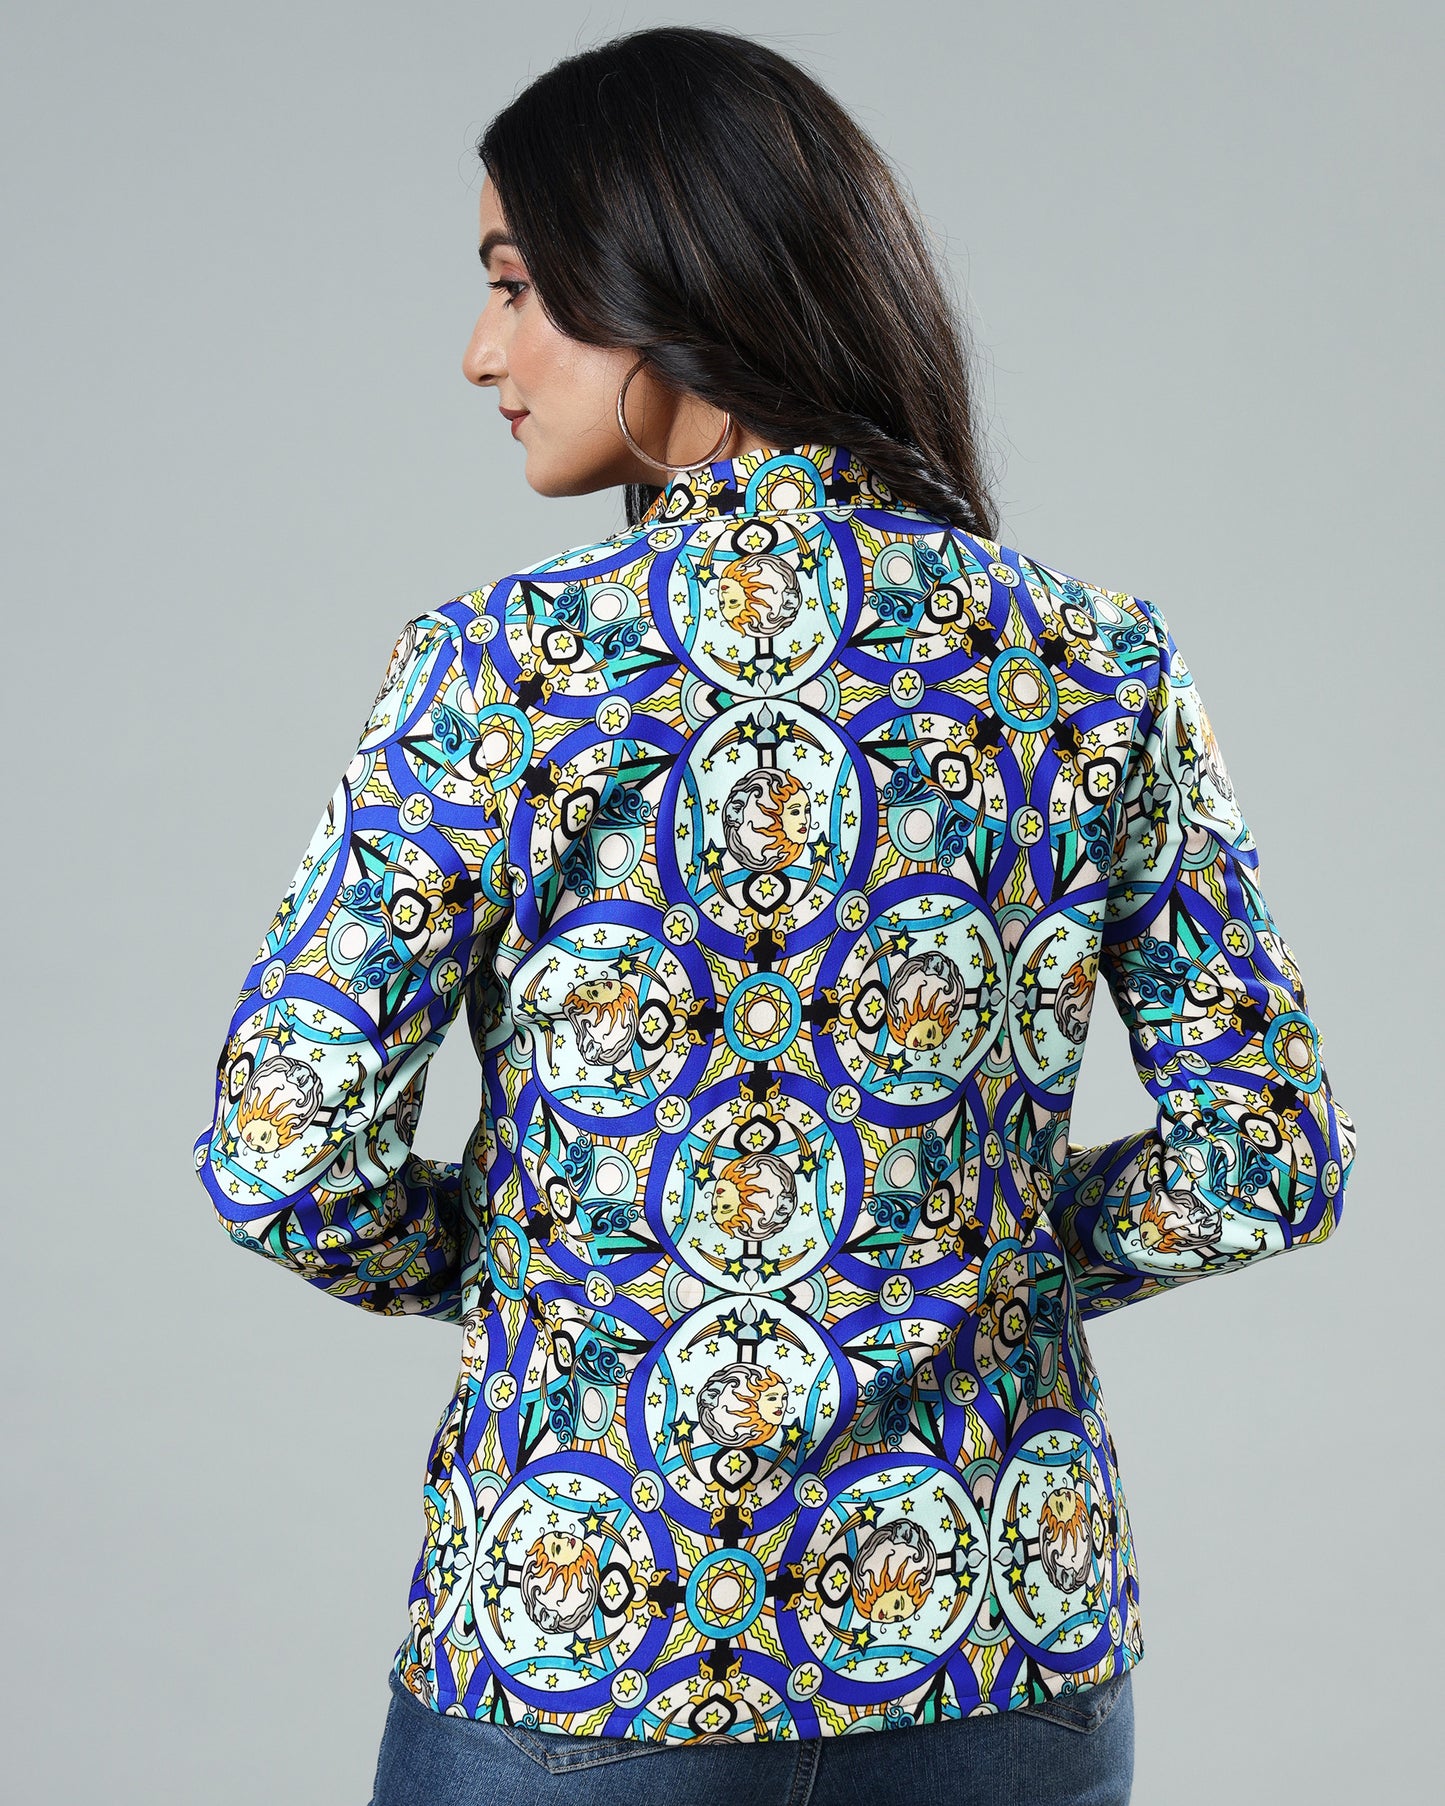 The Artful Remix: A Funky Fusion Expressive Jacket